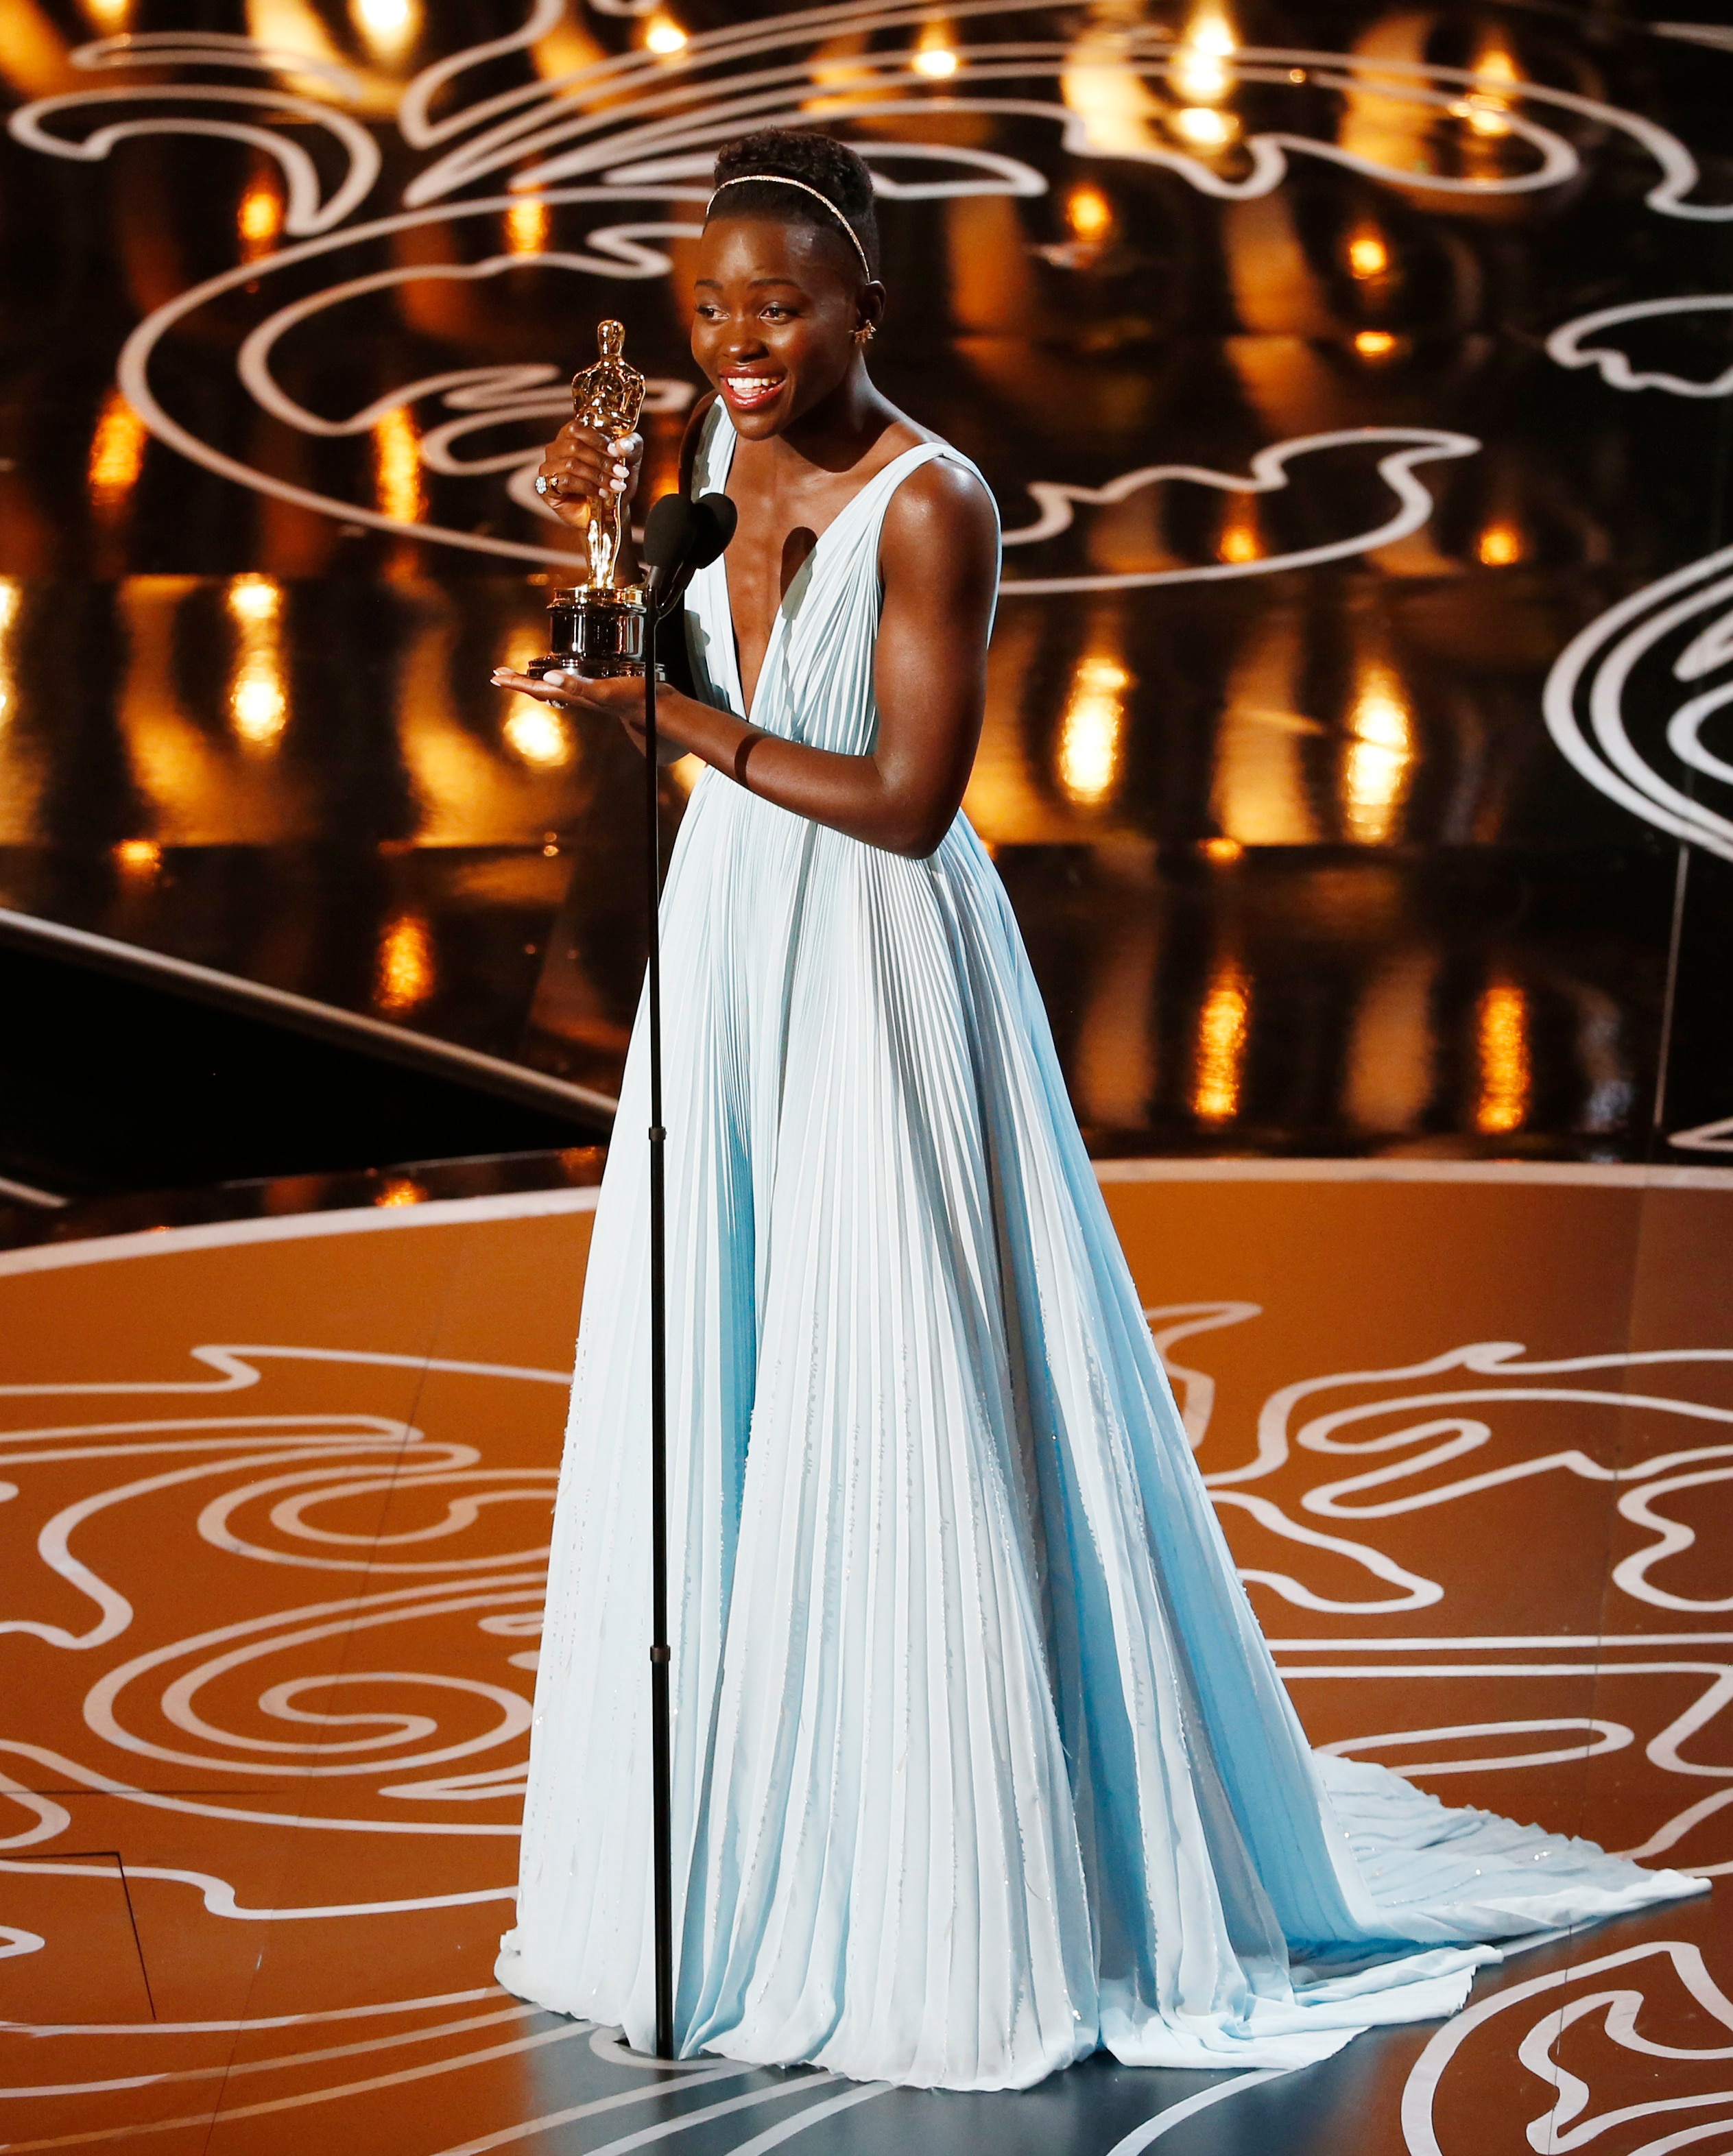 Lupita Nyong'o holding an OScars statue, wearing a powder blue gown with a deep v neck and pleated fabric